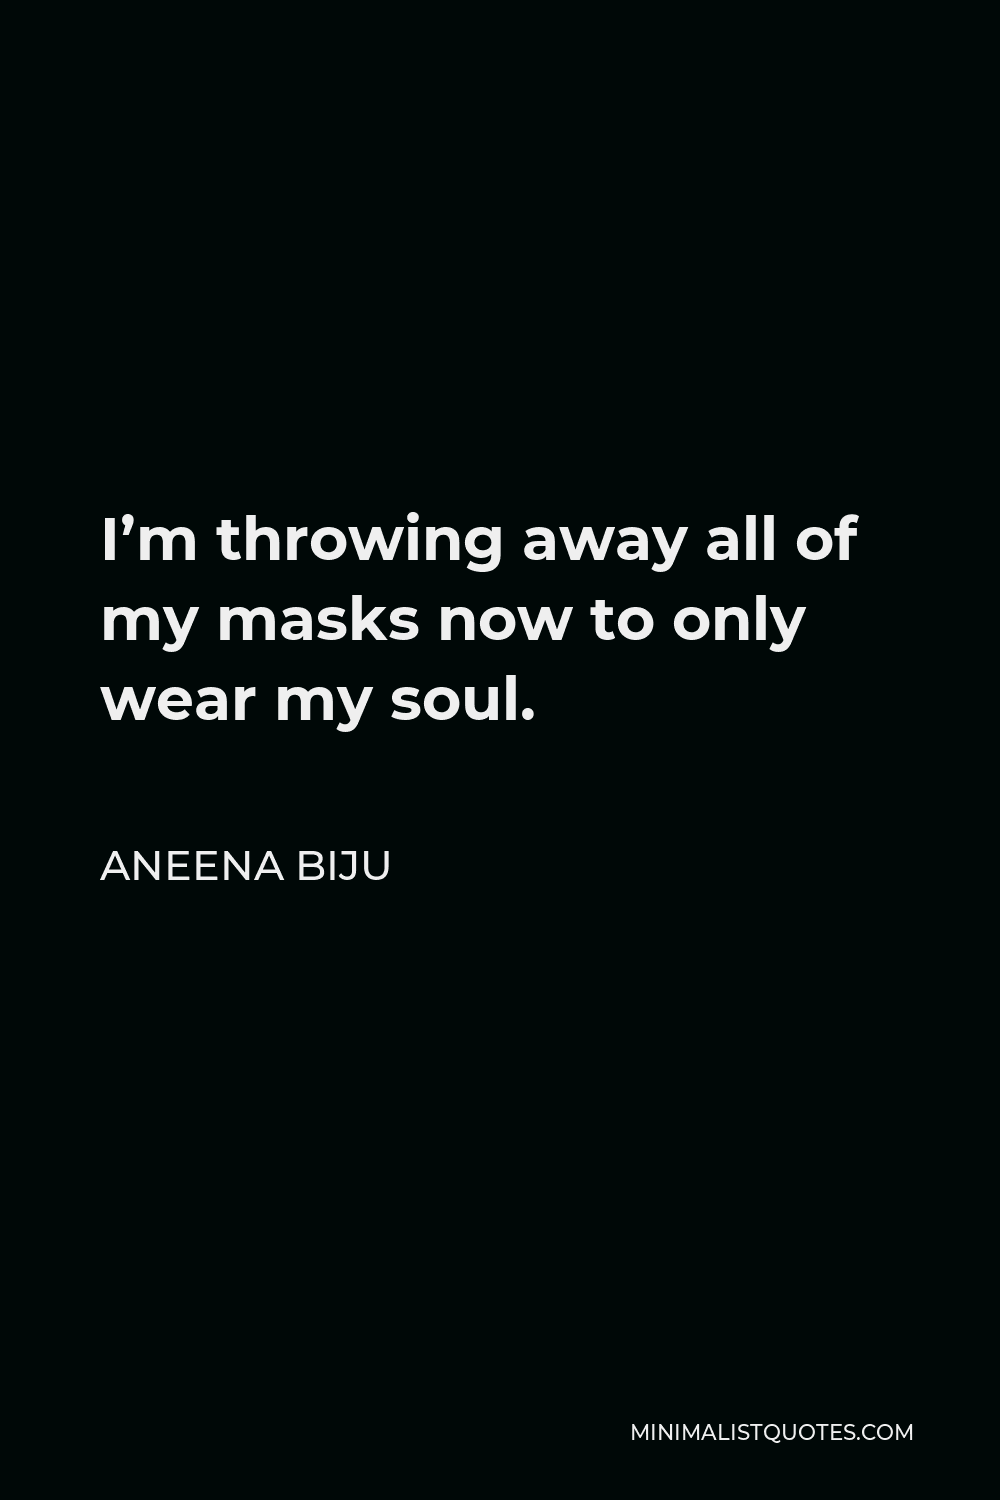 Aneena Biju Quote - I’m throwing away all of my masks now to only wear my soul.